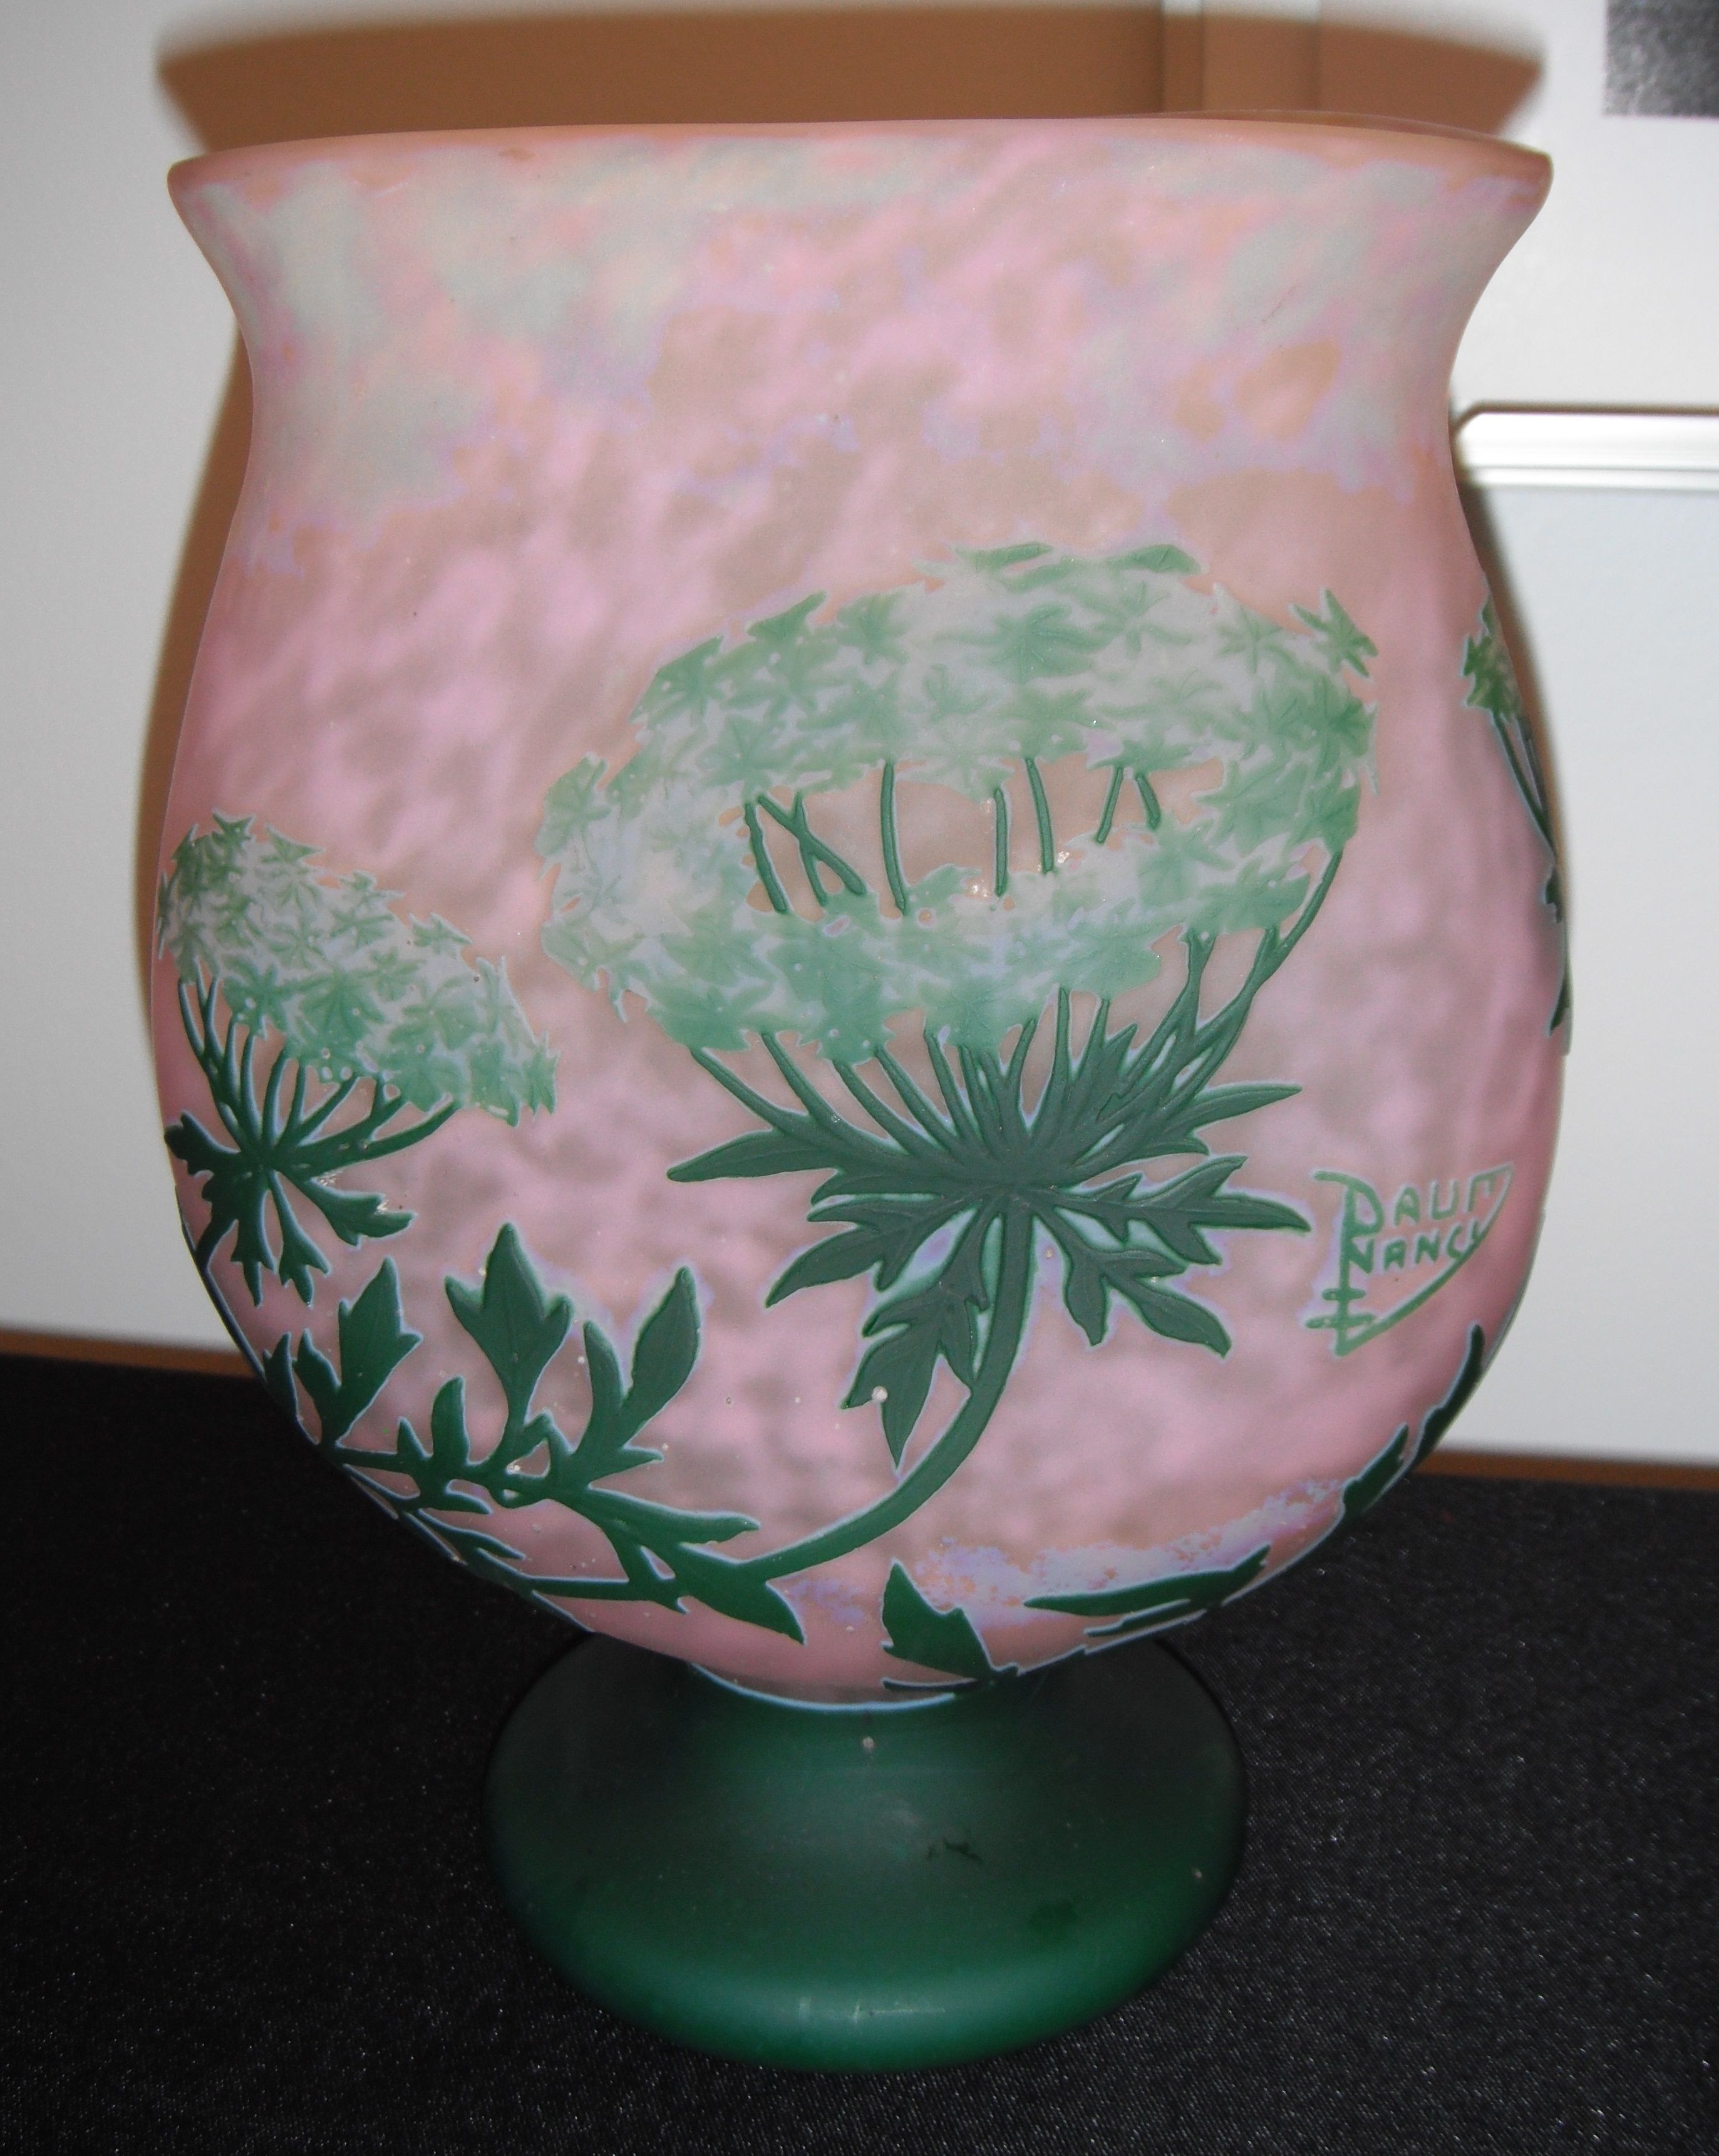 3 gallon glass vase of french daum nancy glass vase dr loris antiques finds from ohio inside french daum nancy glass vase